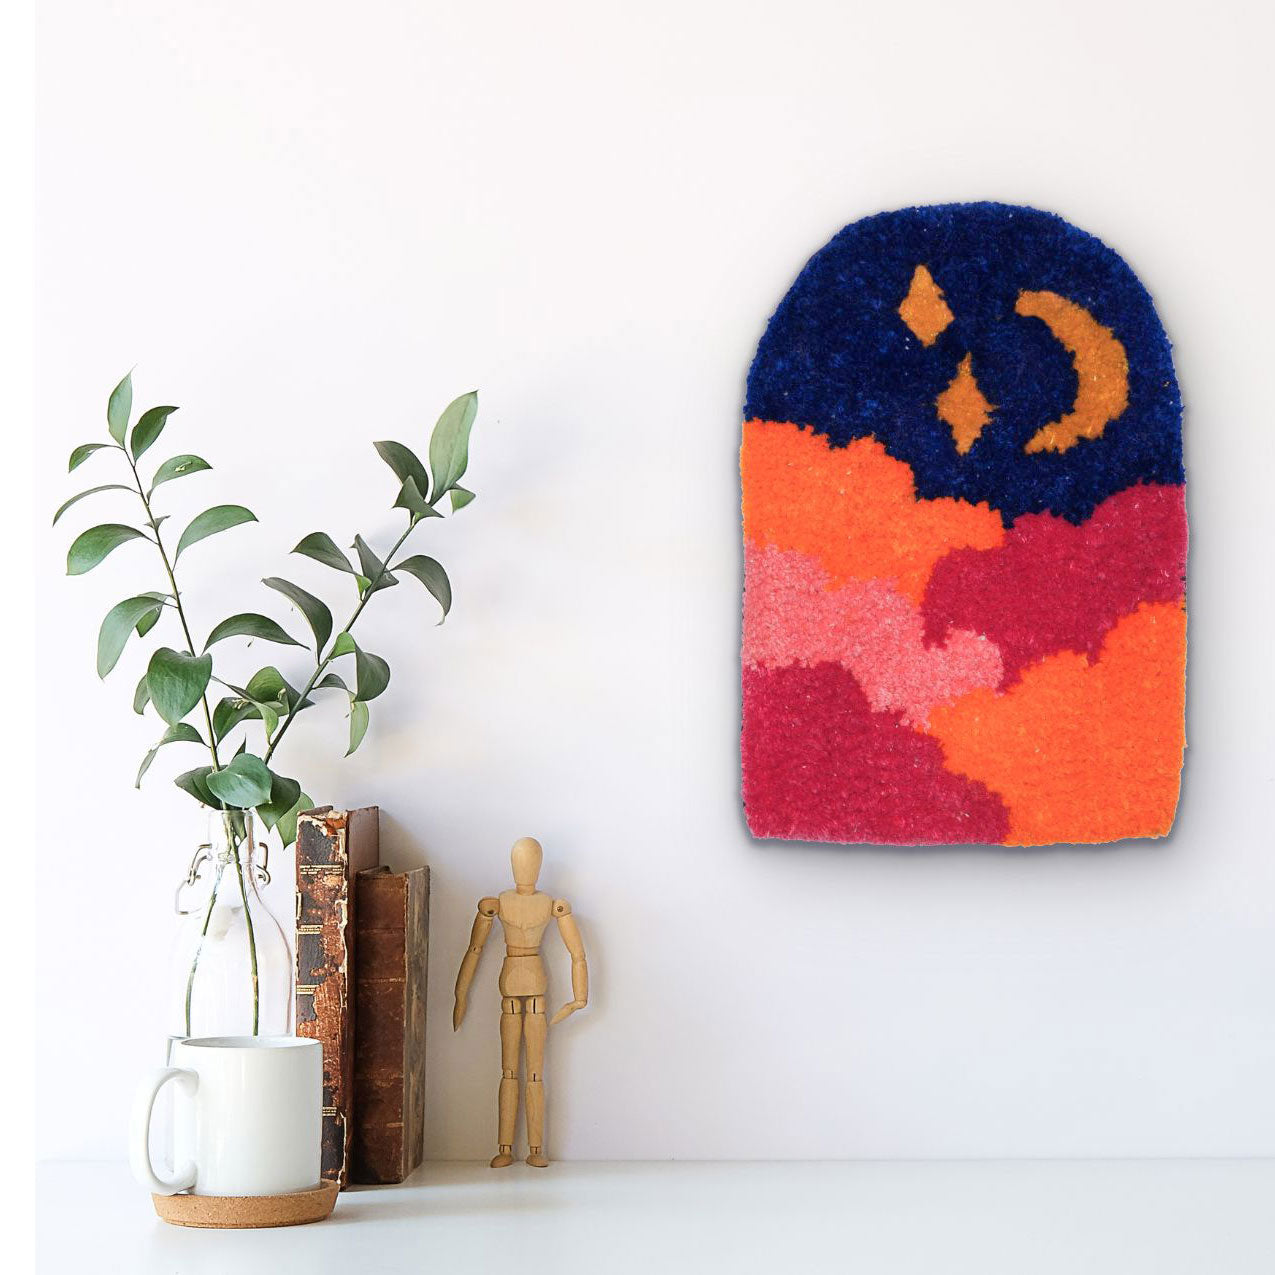 Hand-tufted wall hanging with a night scene of a crescent moon and stars above orange and pink clouds